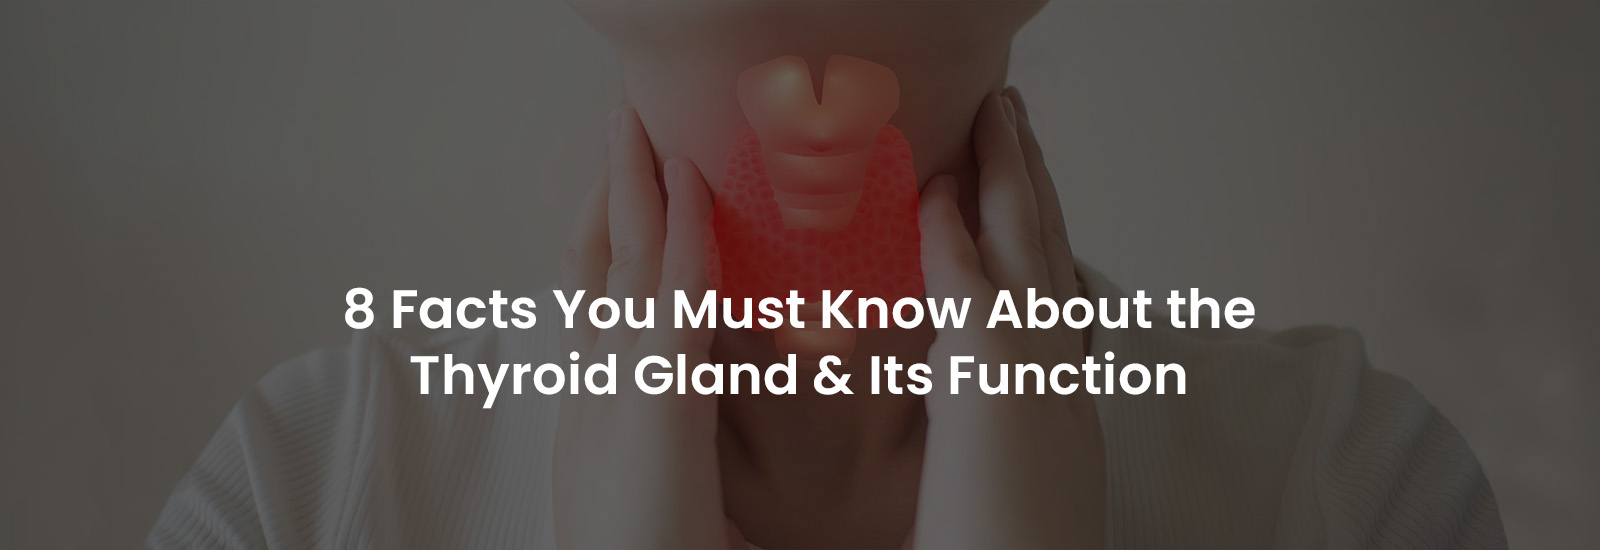 8 Facts You Must Know About the Thyroid Gland & Its Function | Banner Image